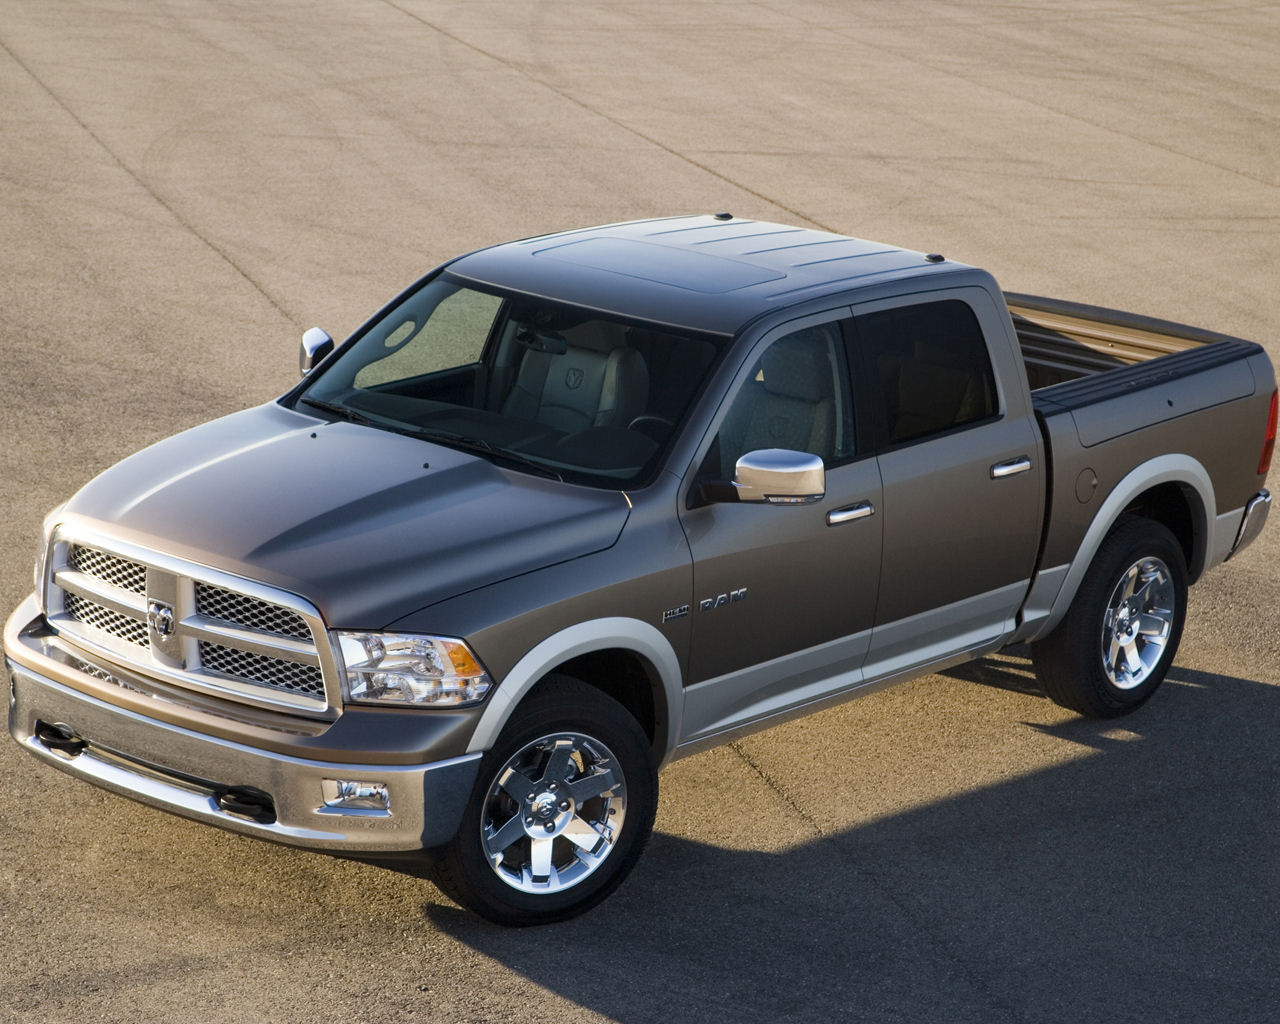 Please right click on the Dodge Ram 1500 wallpaper below and choose